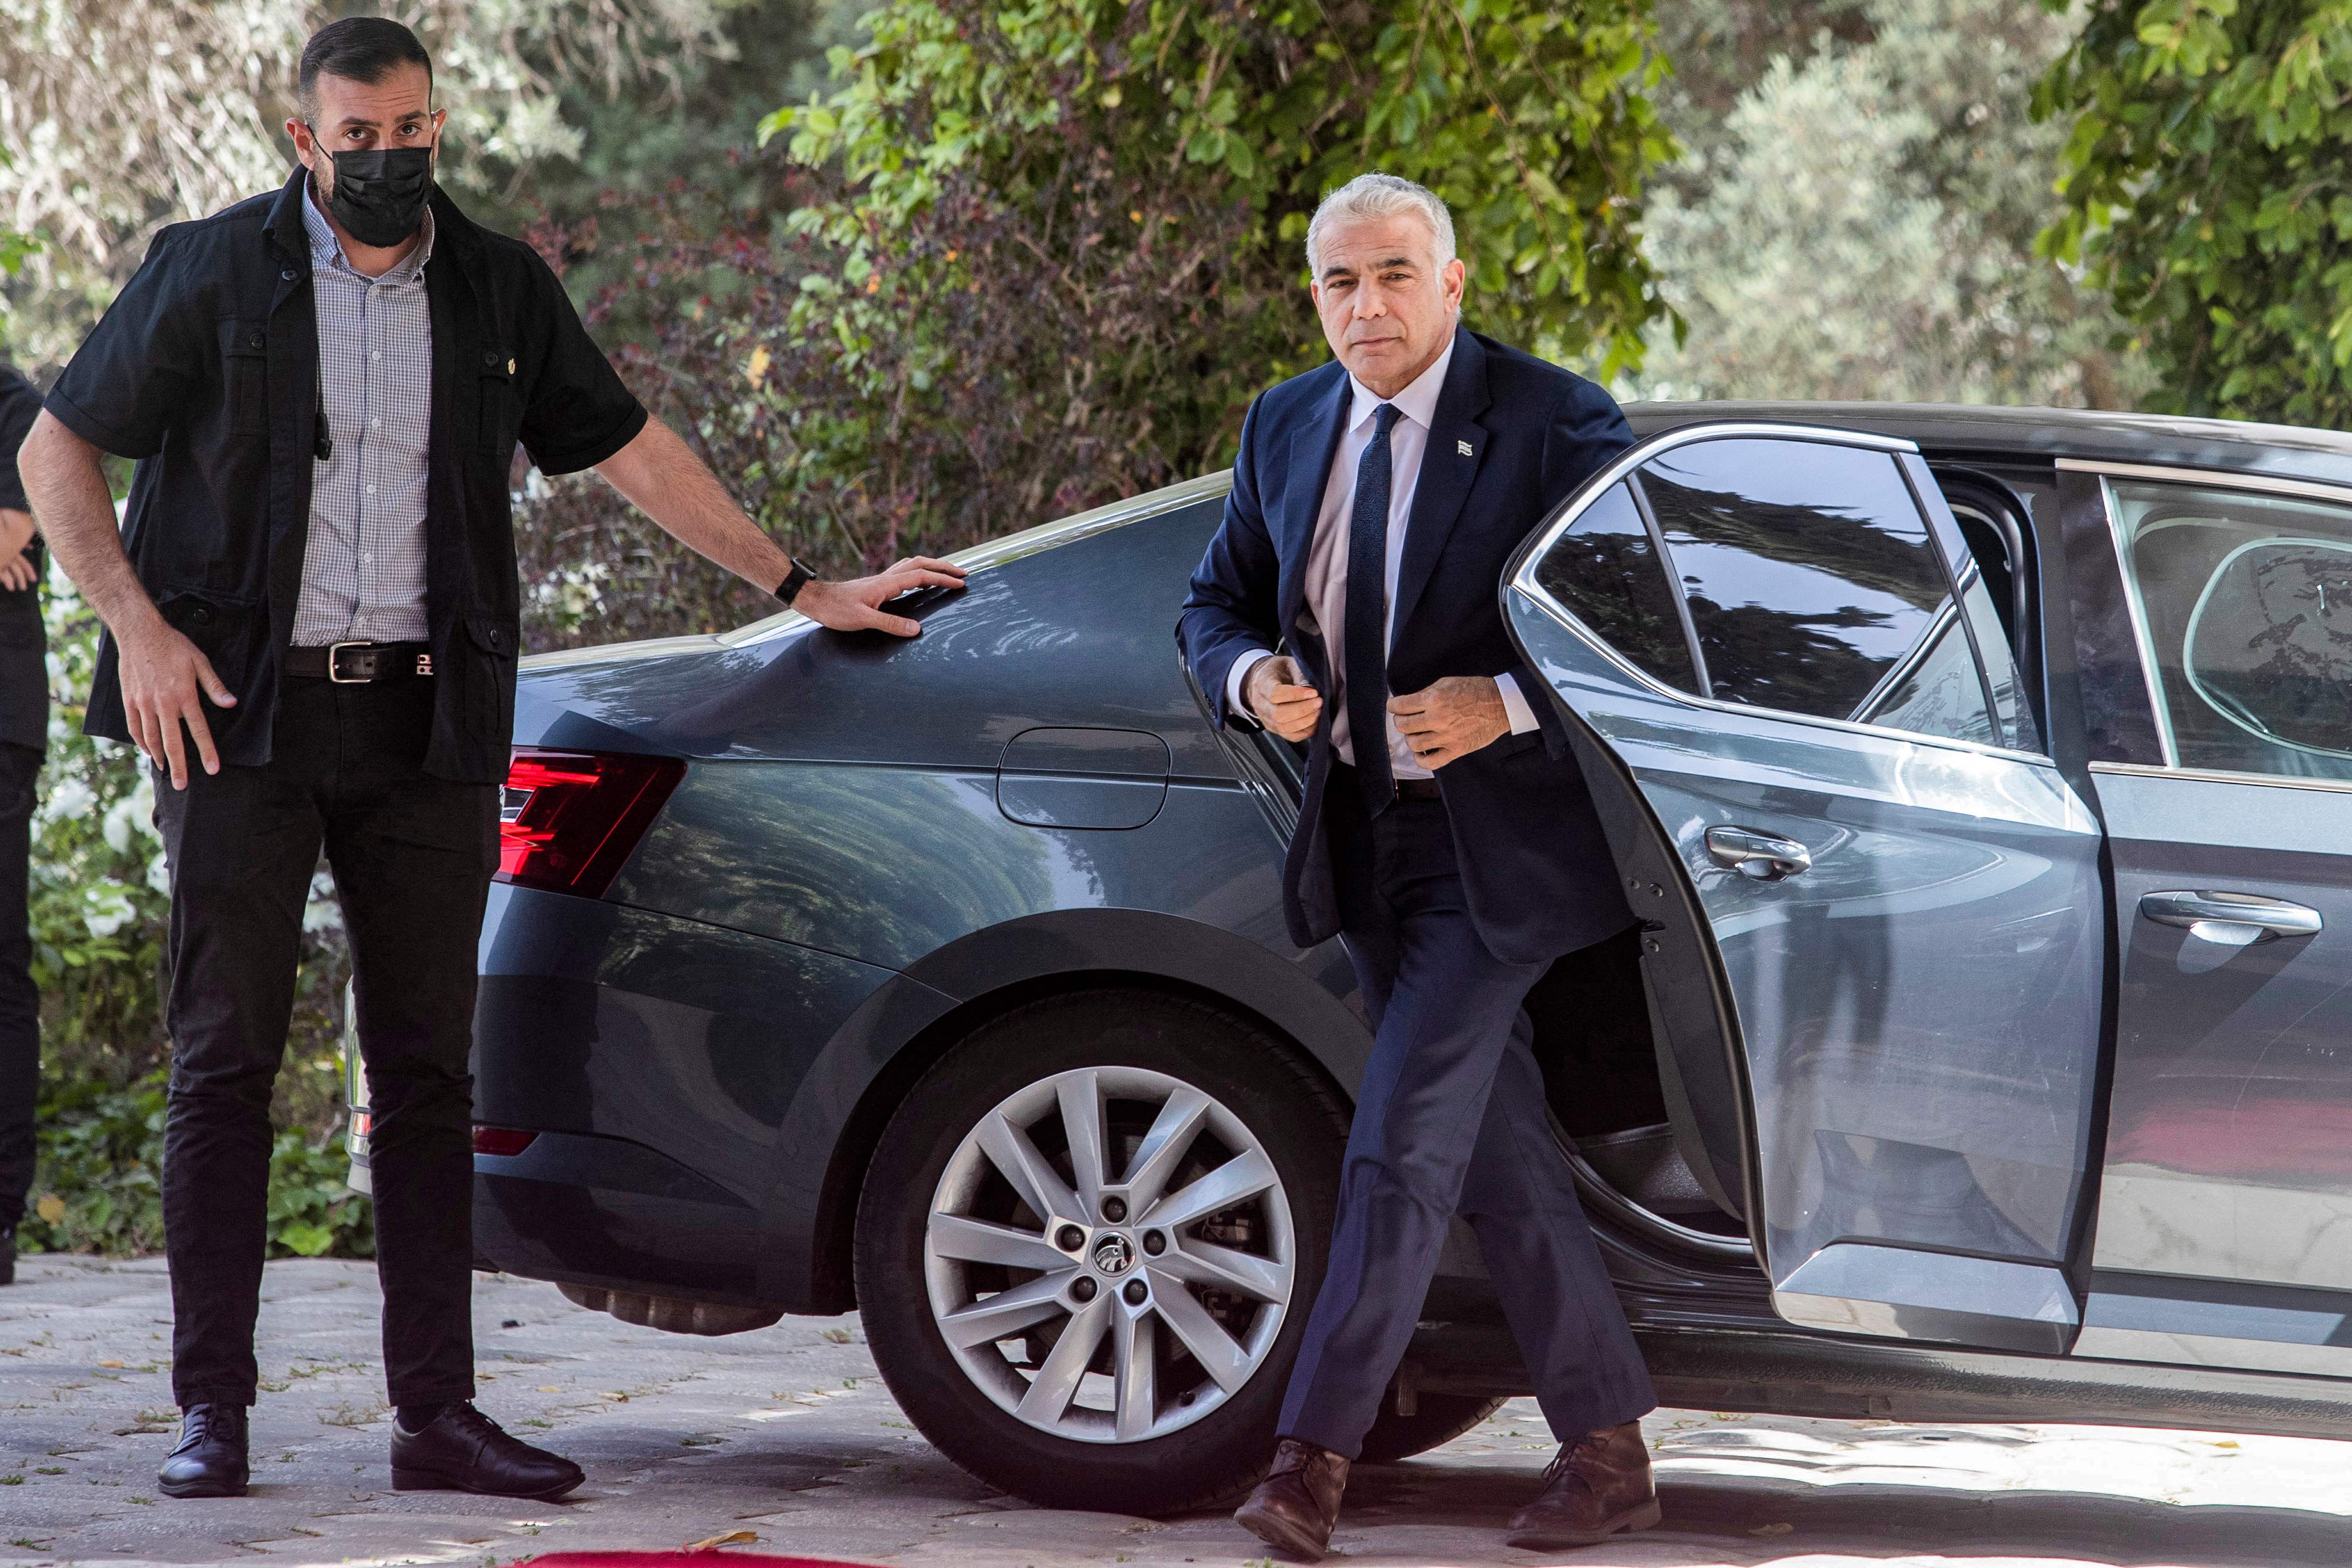 Doors opening? Yair Lapid, leader of the Yesh Atid (There Is a Future) Party, has been tasked with forming a coalition government to break Israel’s political impasse